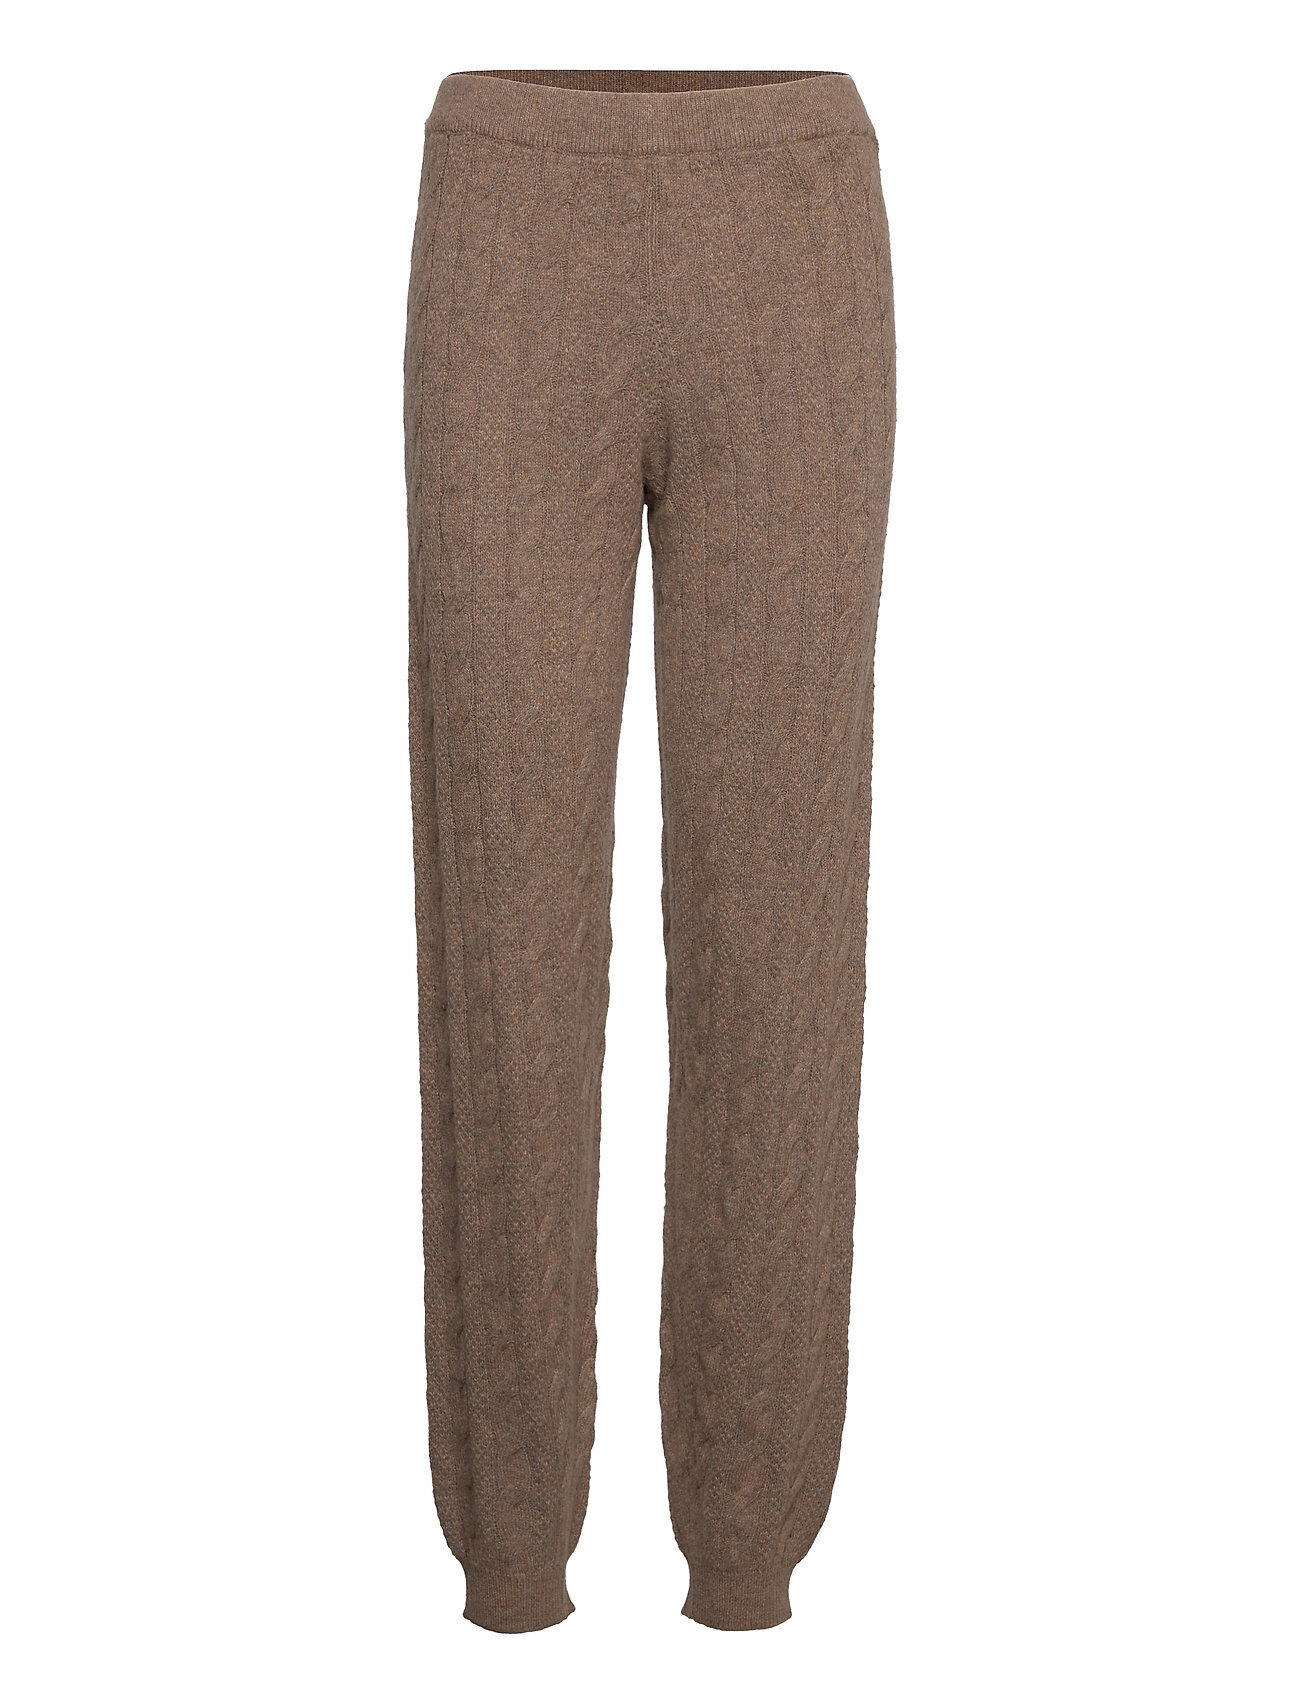 Selected Femme Slf Ansley Mw Cable Knit Pant B Joggebukser Pysjbukser Brun Selected Femme